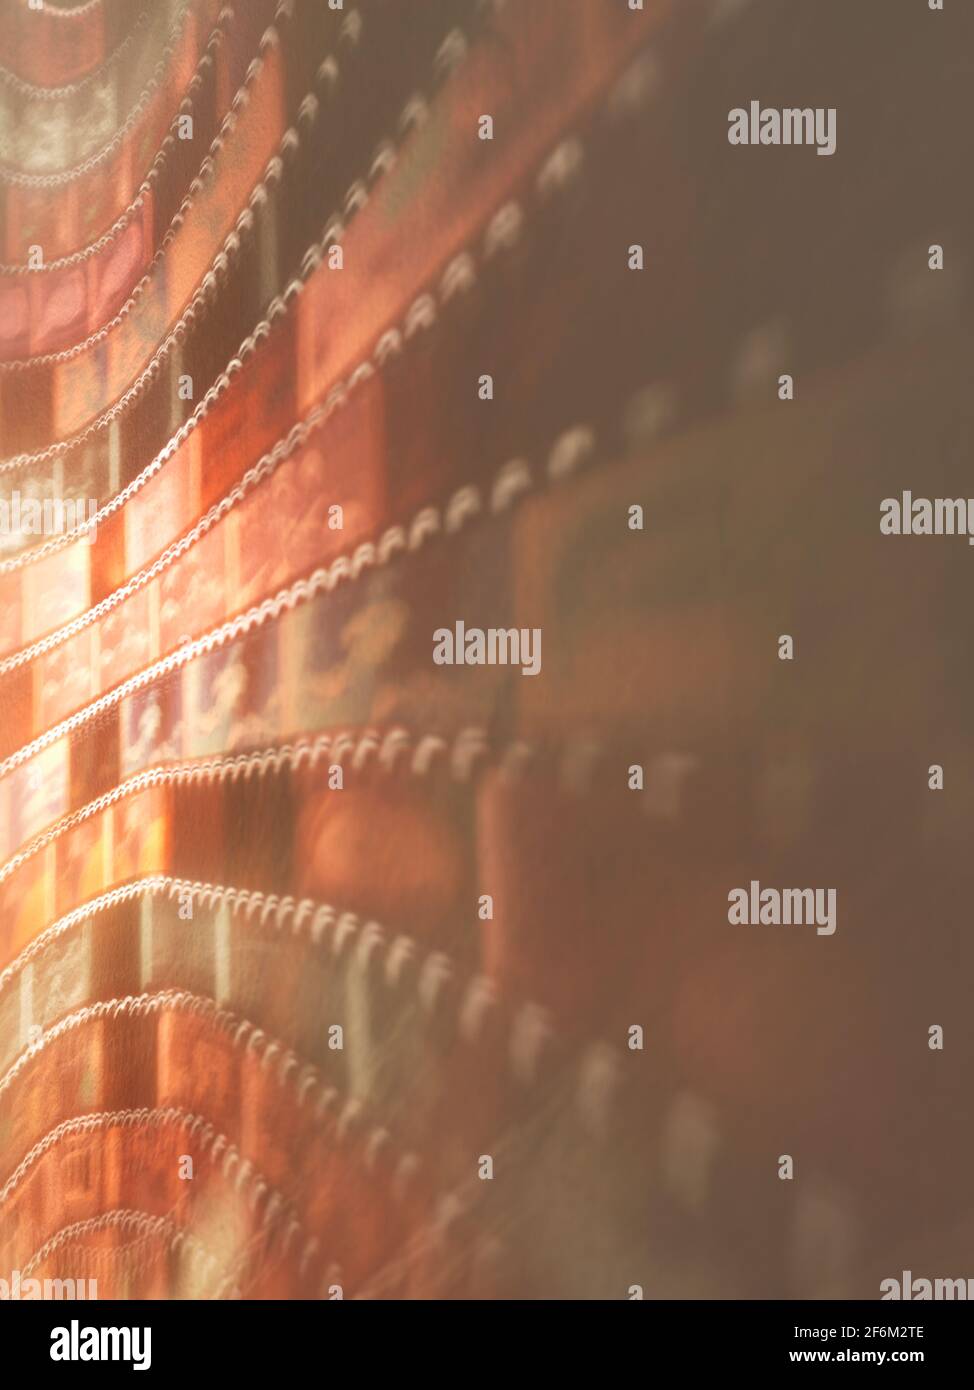 film strips projected on a wall Stock Photo